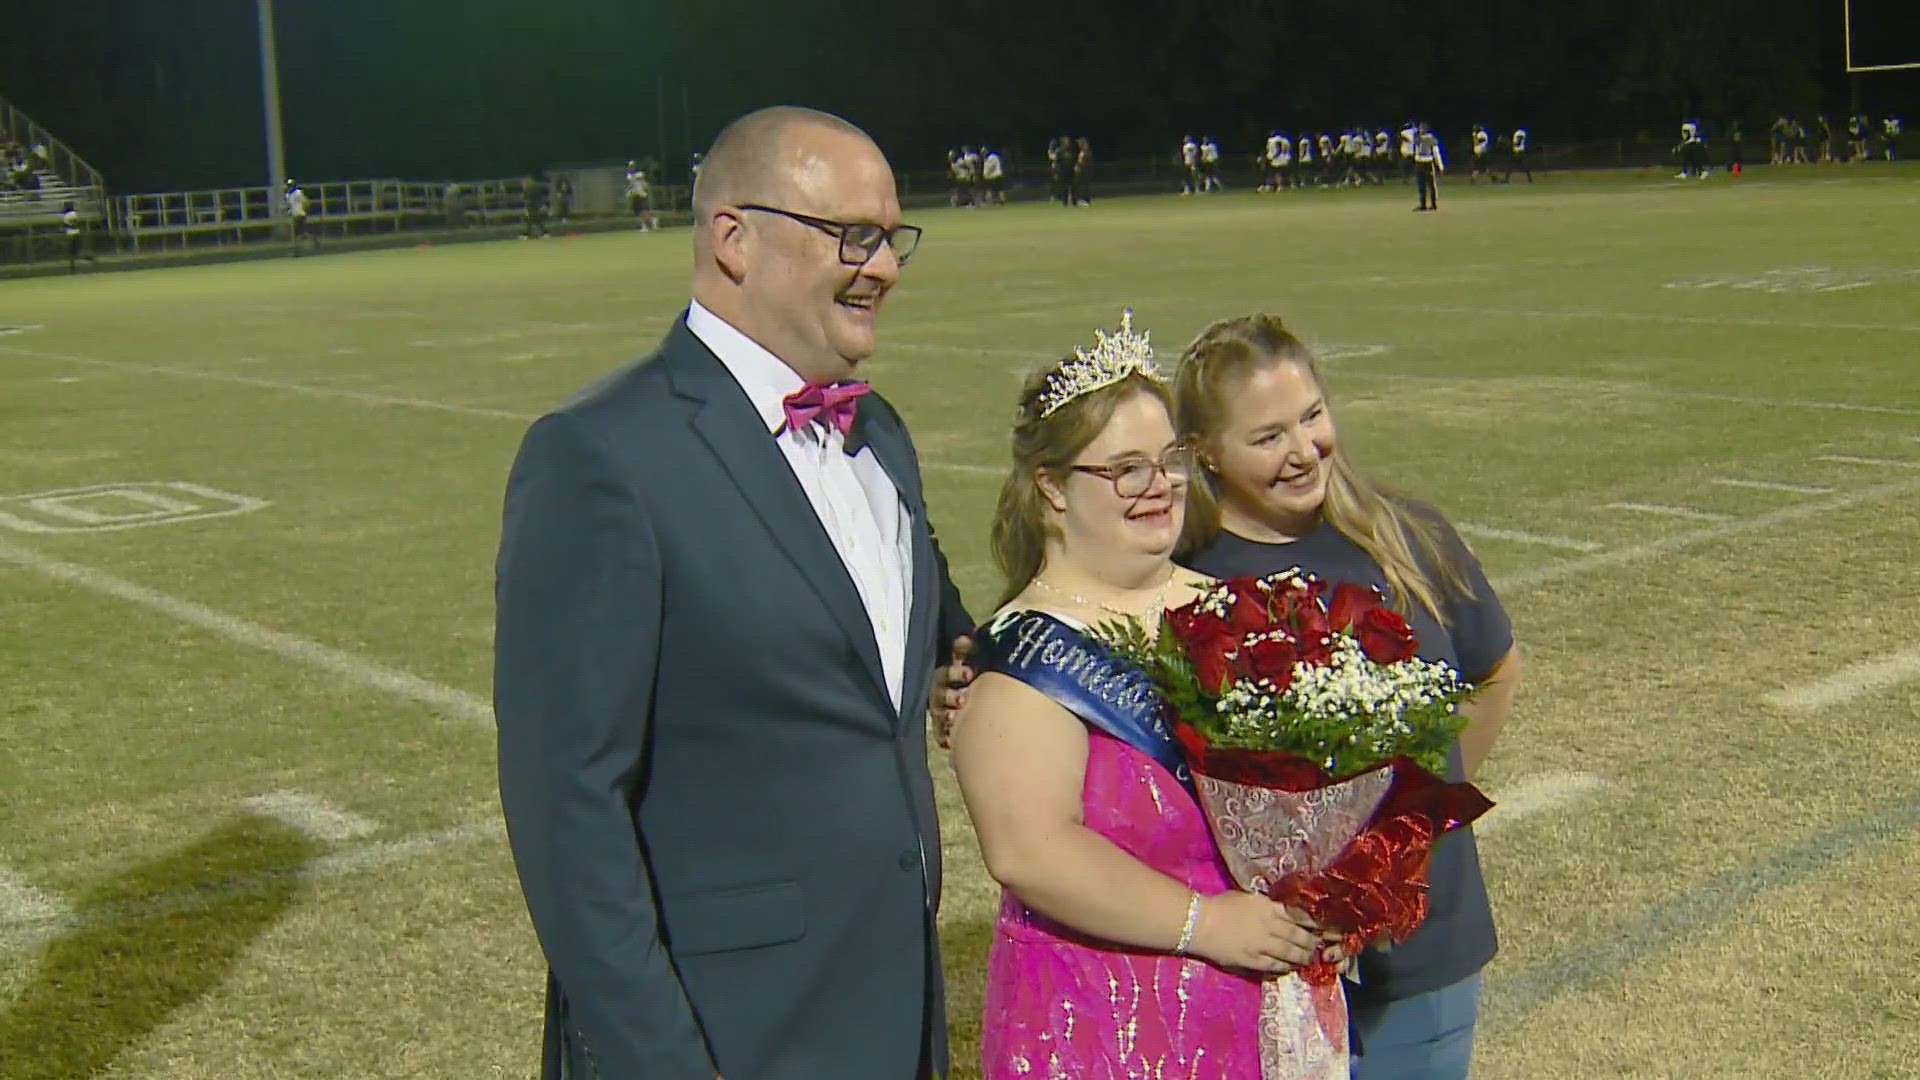 Student with Down Syndrome named homecoming queen